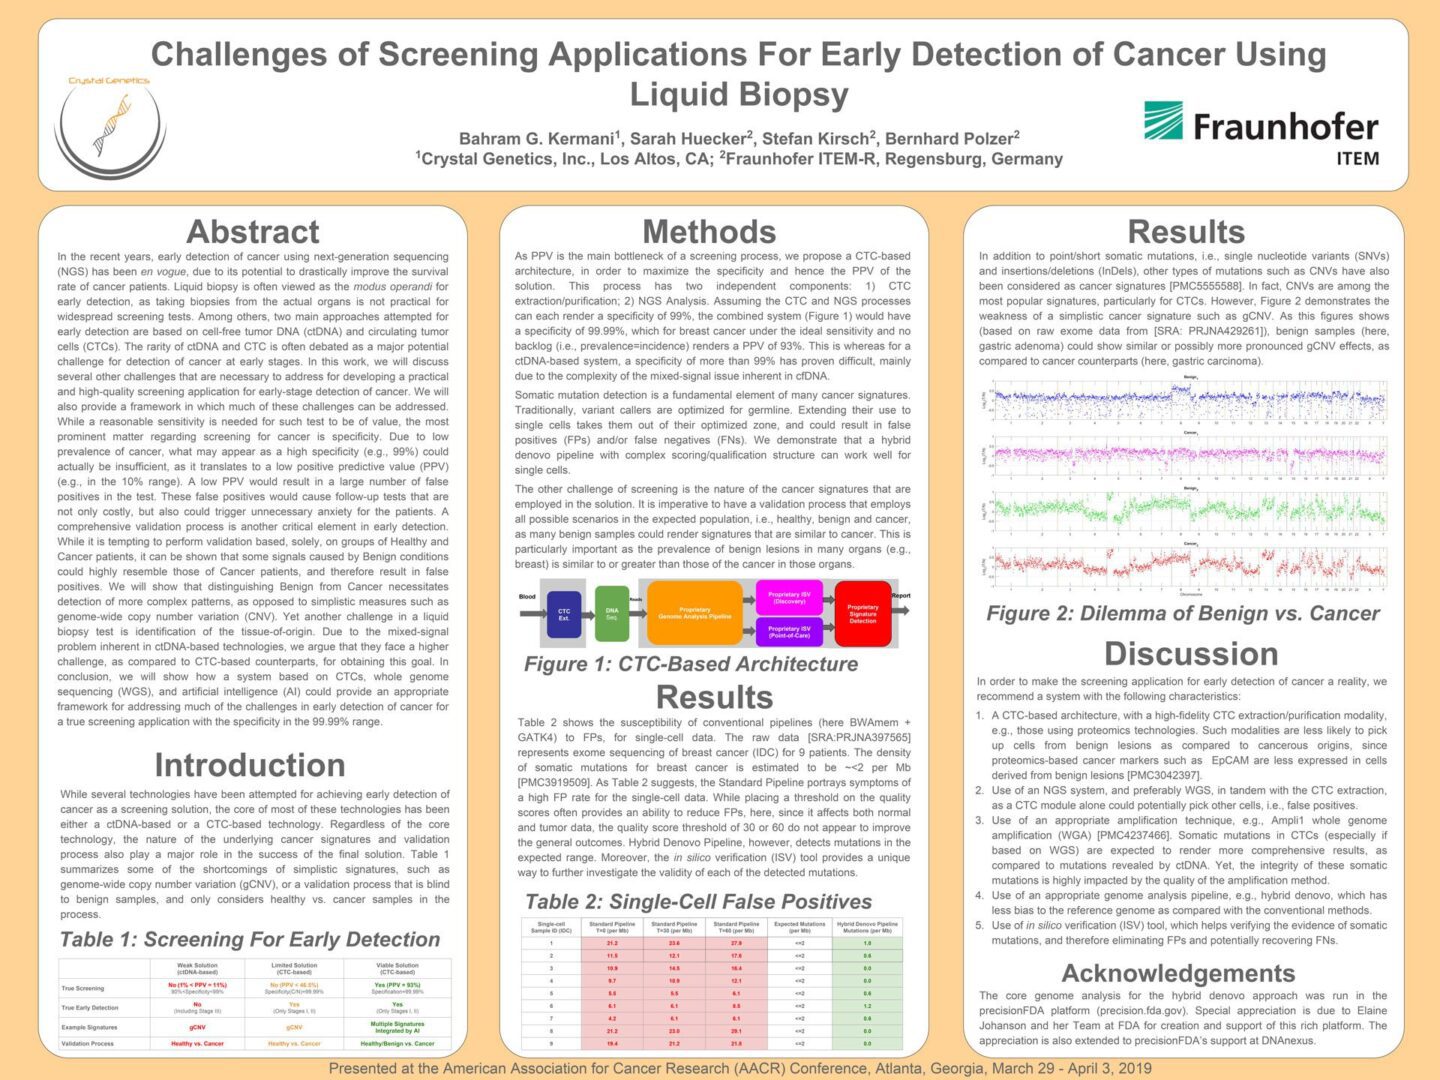 A poster of the challenges of screening applications for early detection of cancer.